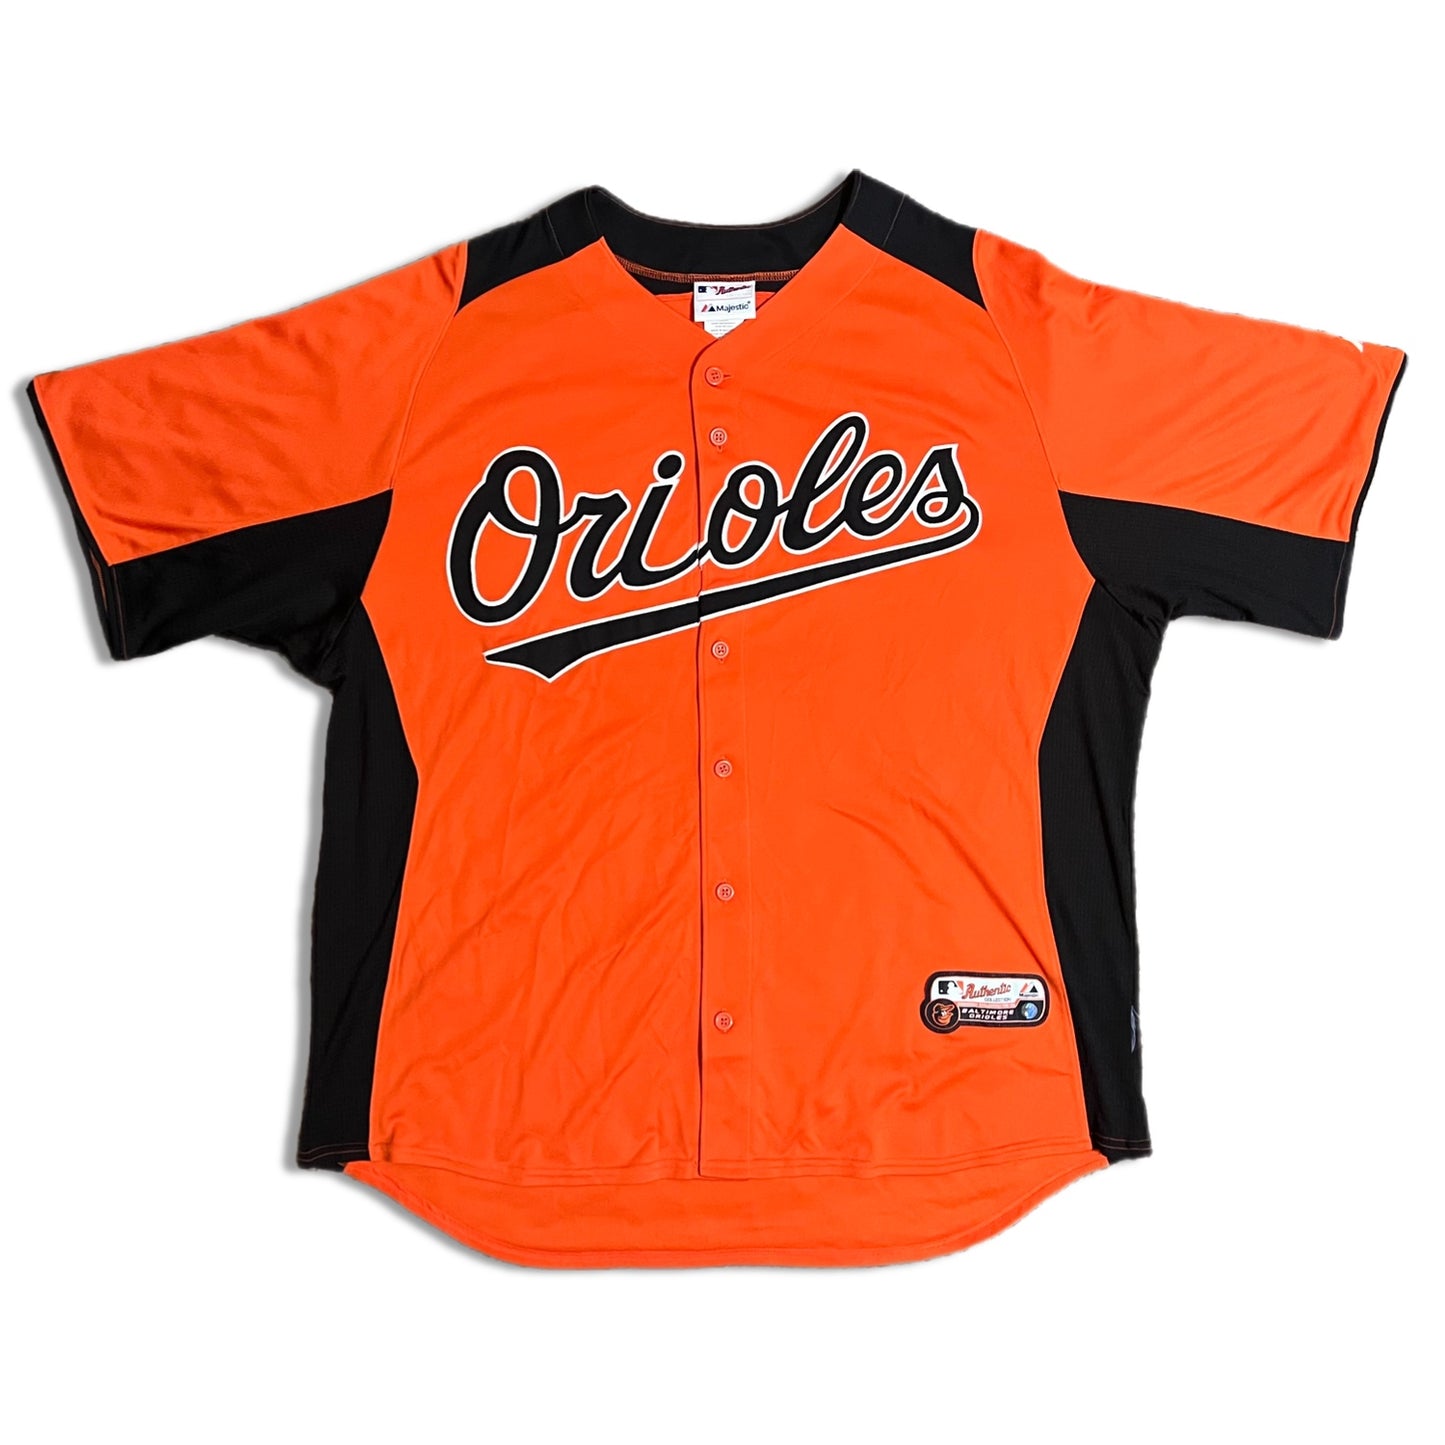 2013 Authentic Baltimore Orioles Spring Training & Batting Practice Jersey - 2XL